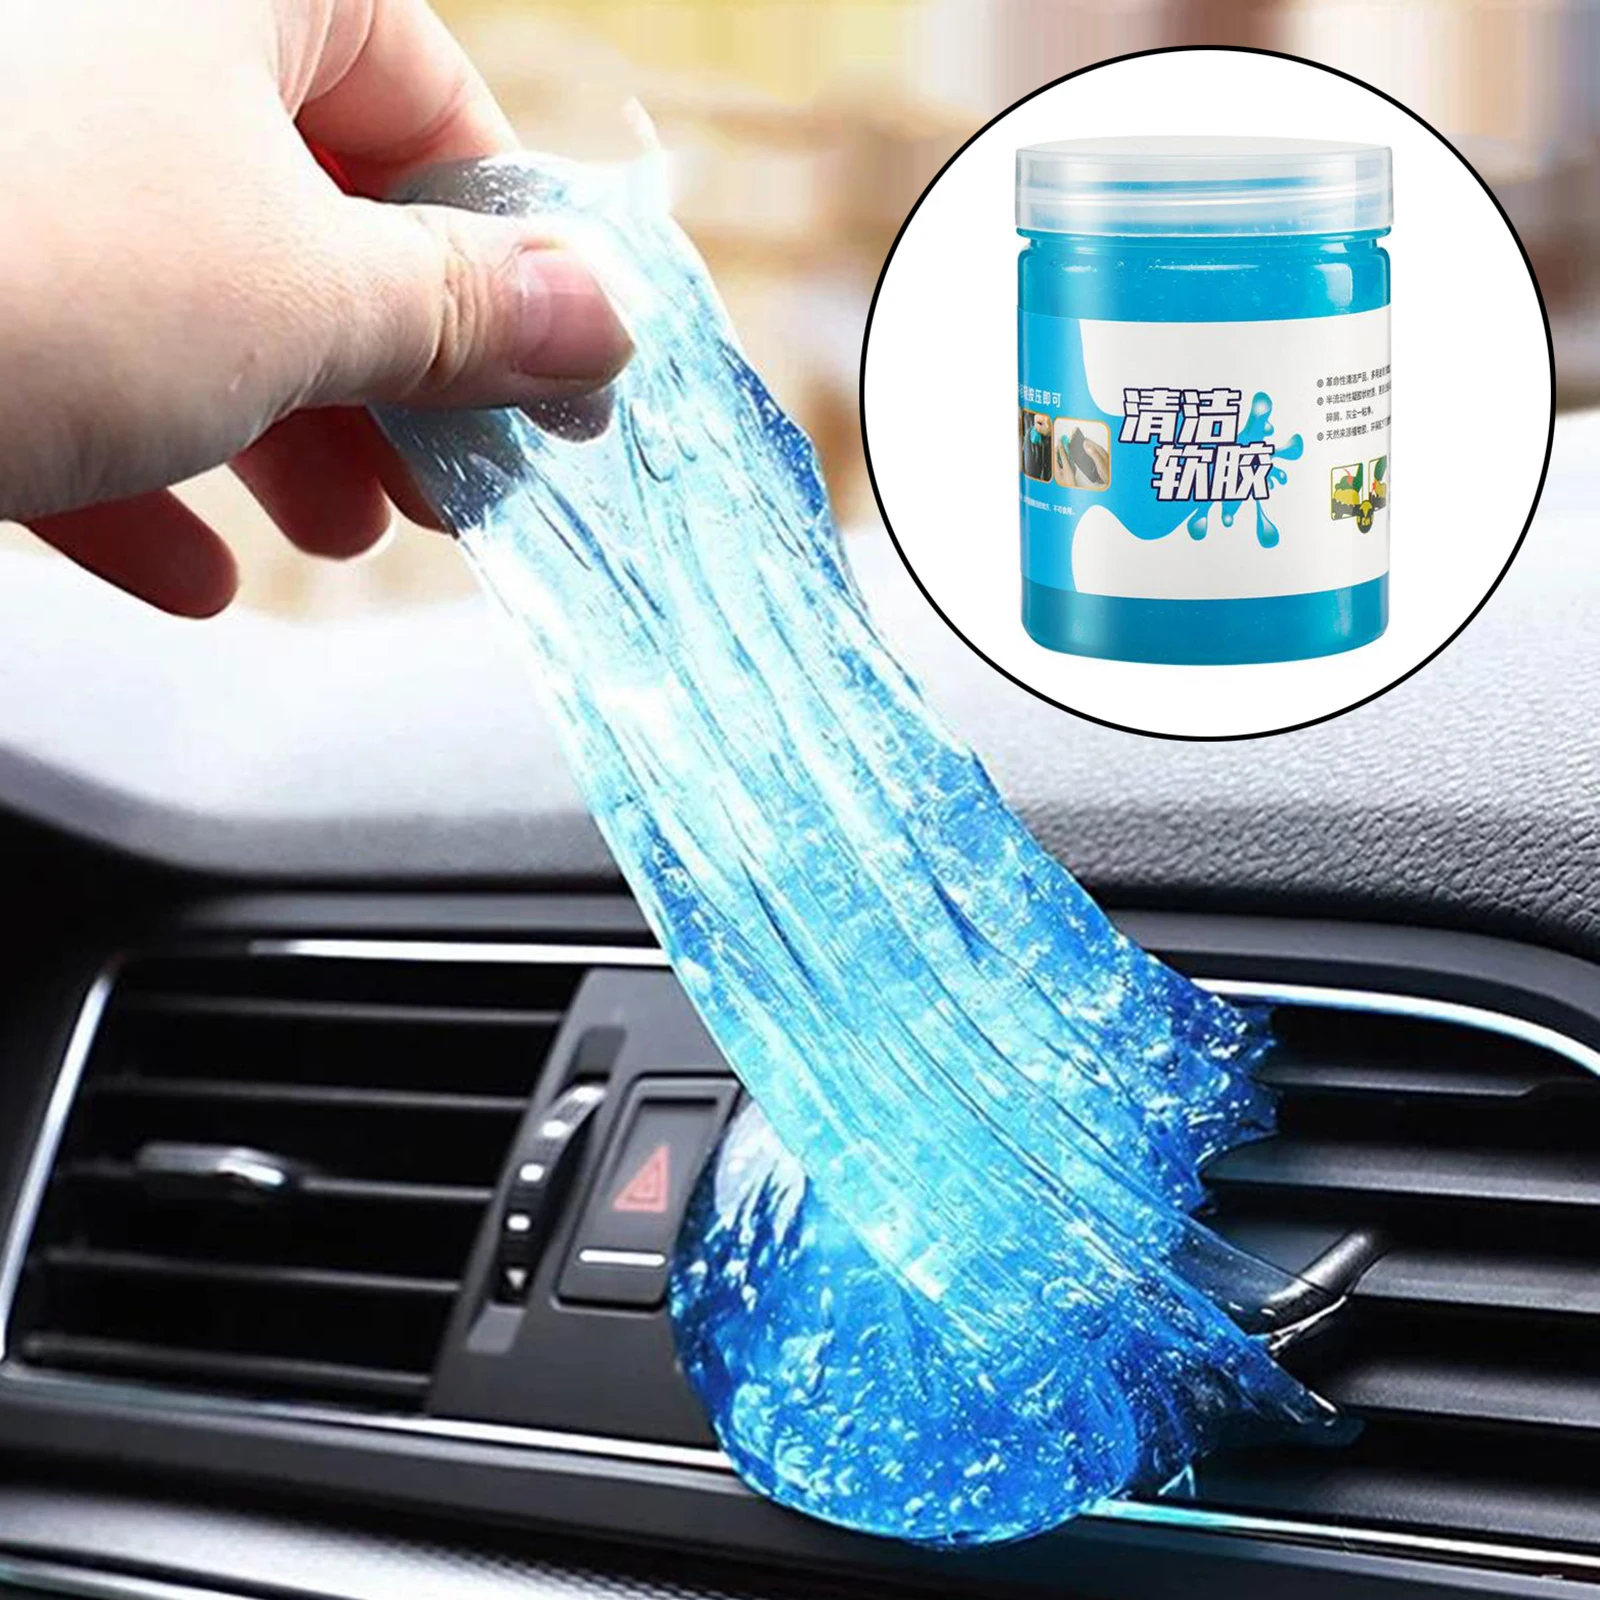 Cleaning Gel Universal Super Cleaner Putty Slime for Car Vent Keyboard Auto  Dashboard Dust Dirt Remover PC Phone Laptops Cameras